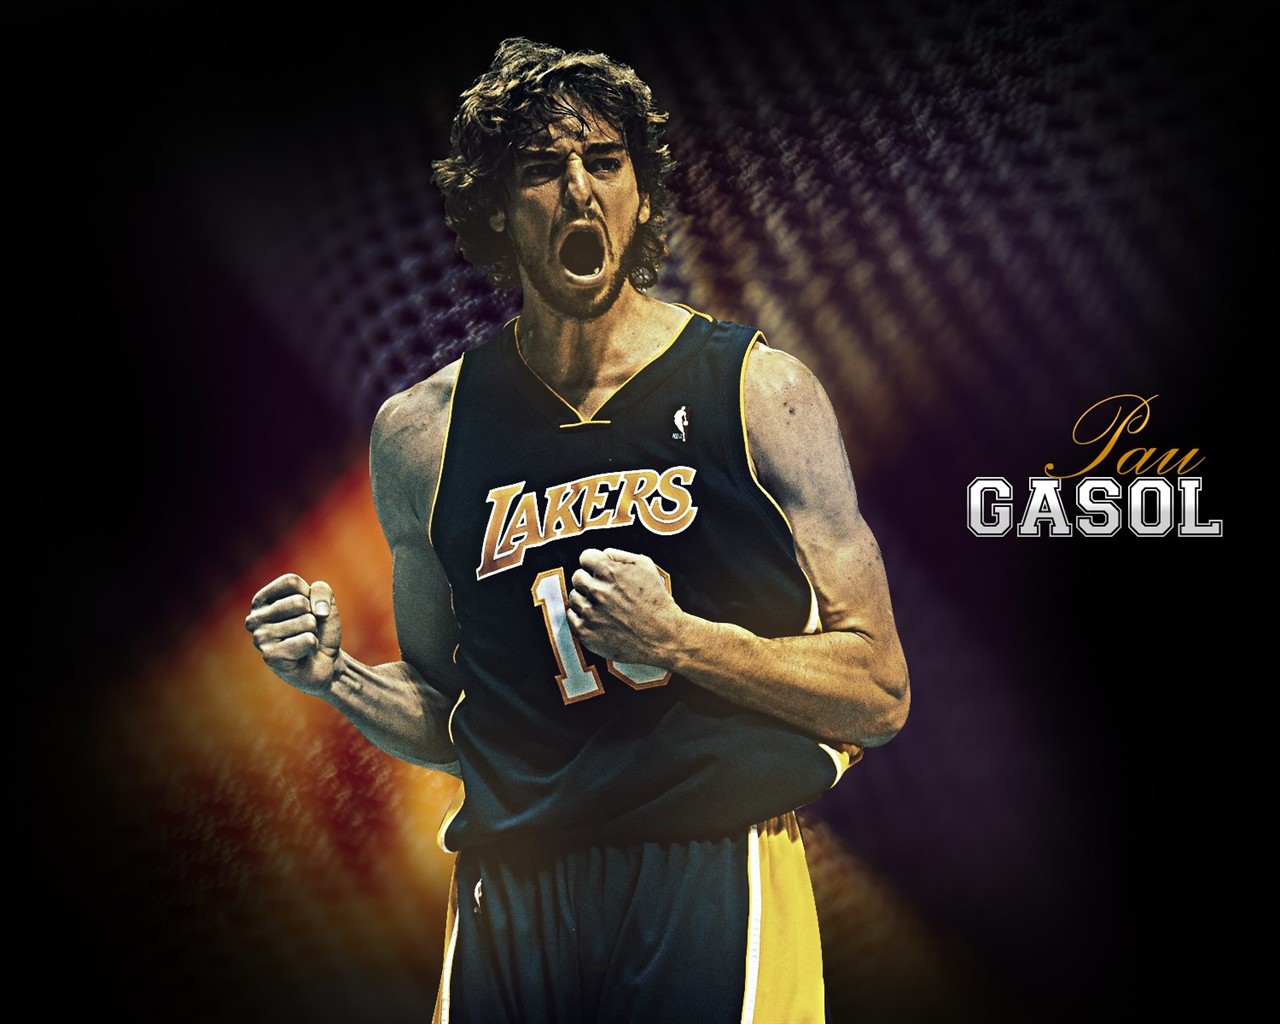 Los Angeles Lakers Wallpaper Oficial #20 - 1280x1024